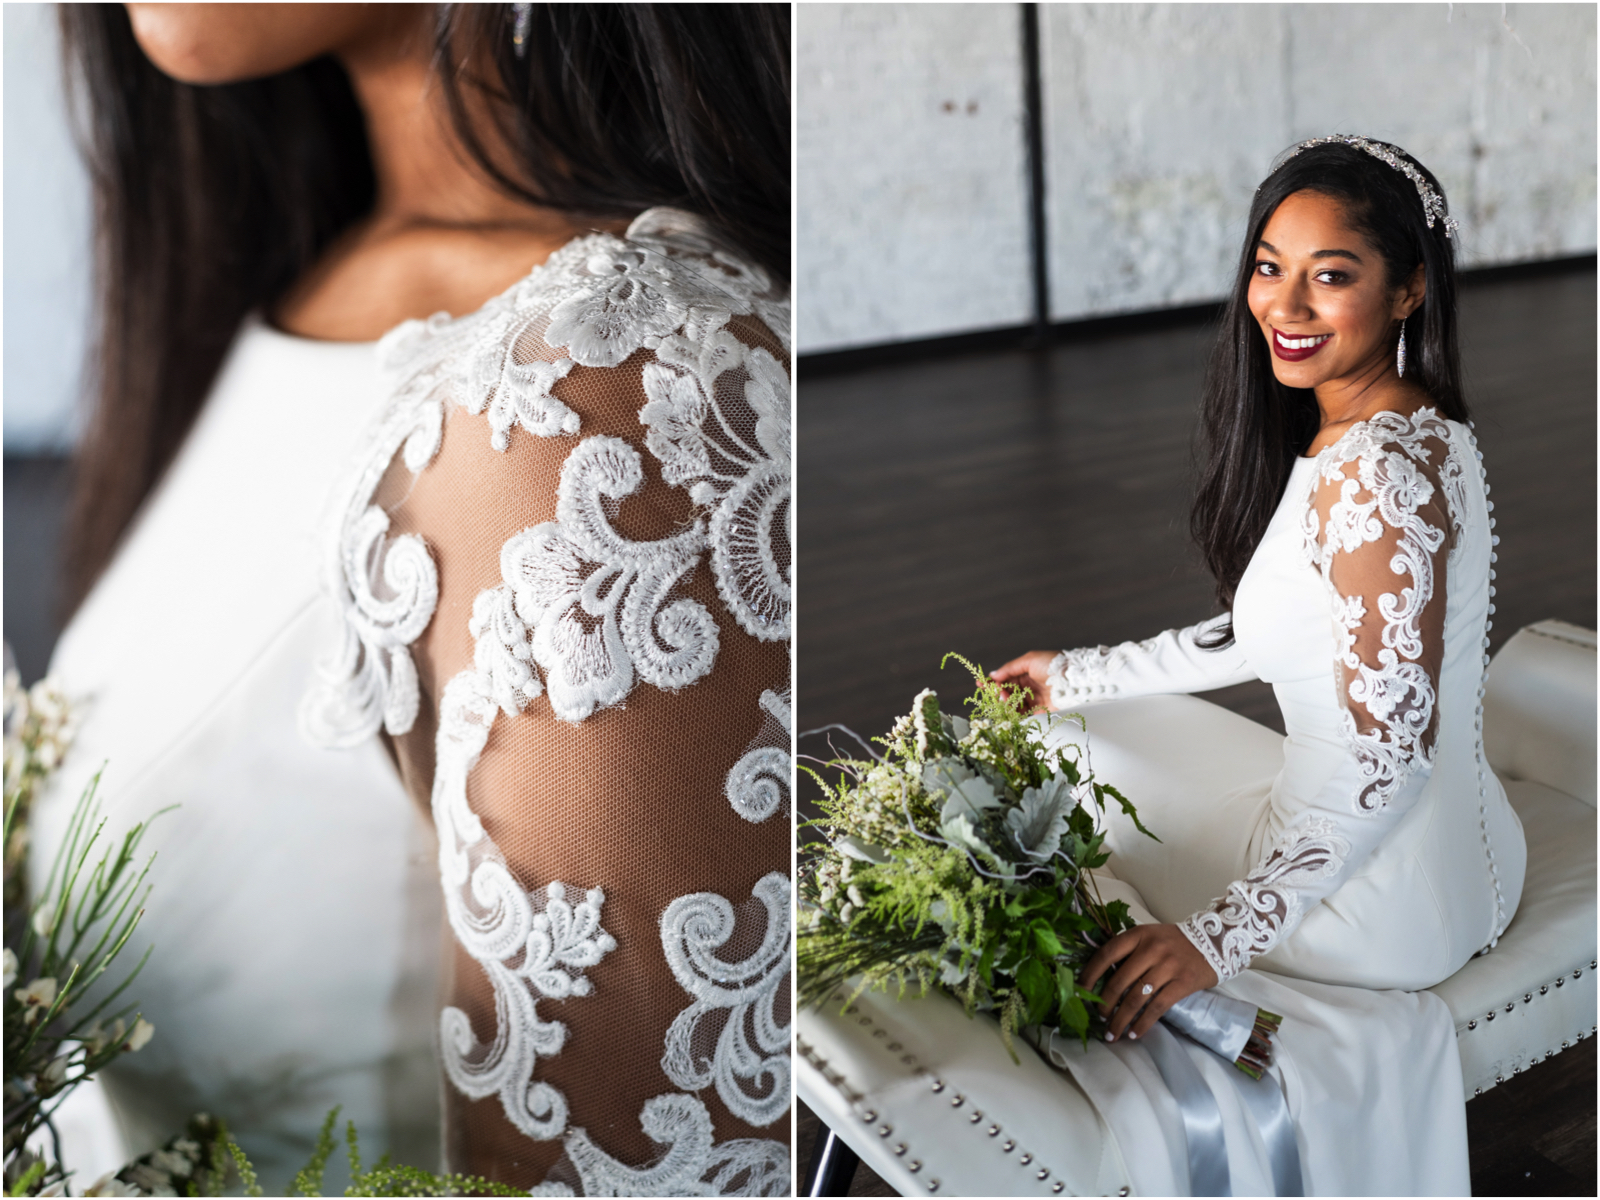 Top 10 Reasons Why You Should Book a Bridal Session